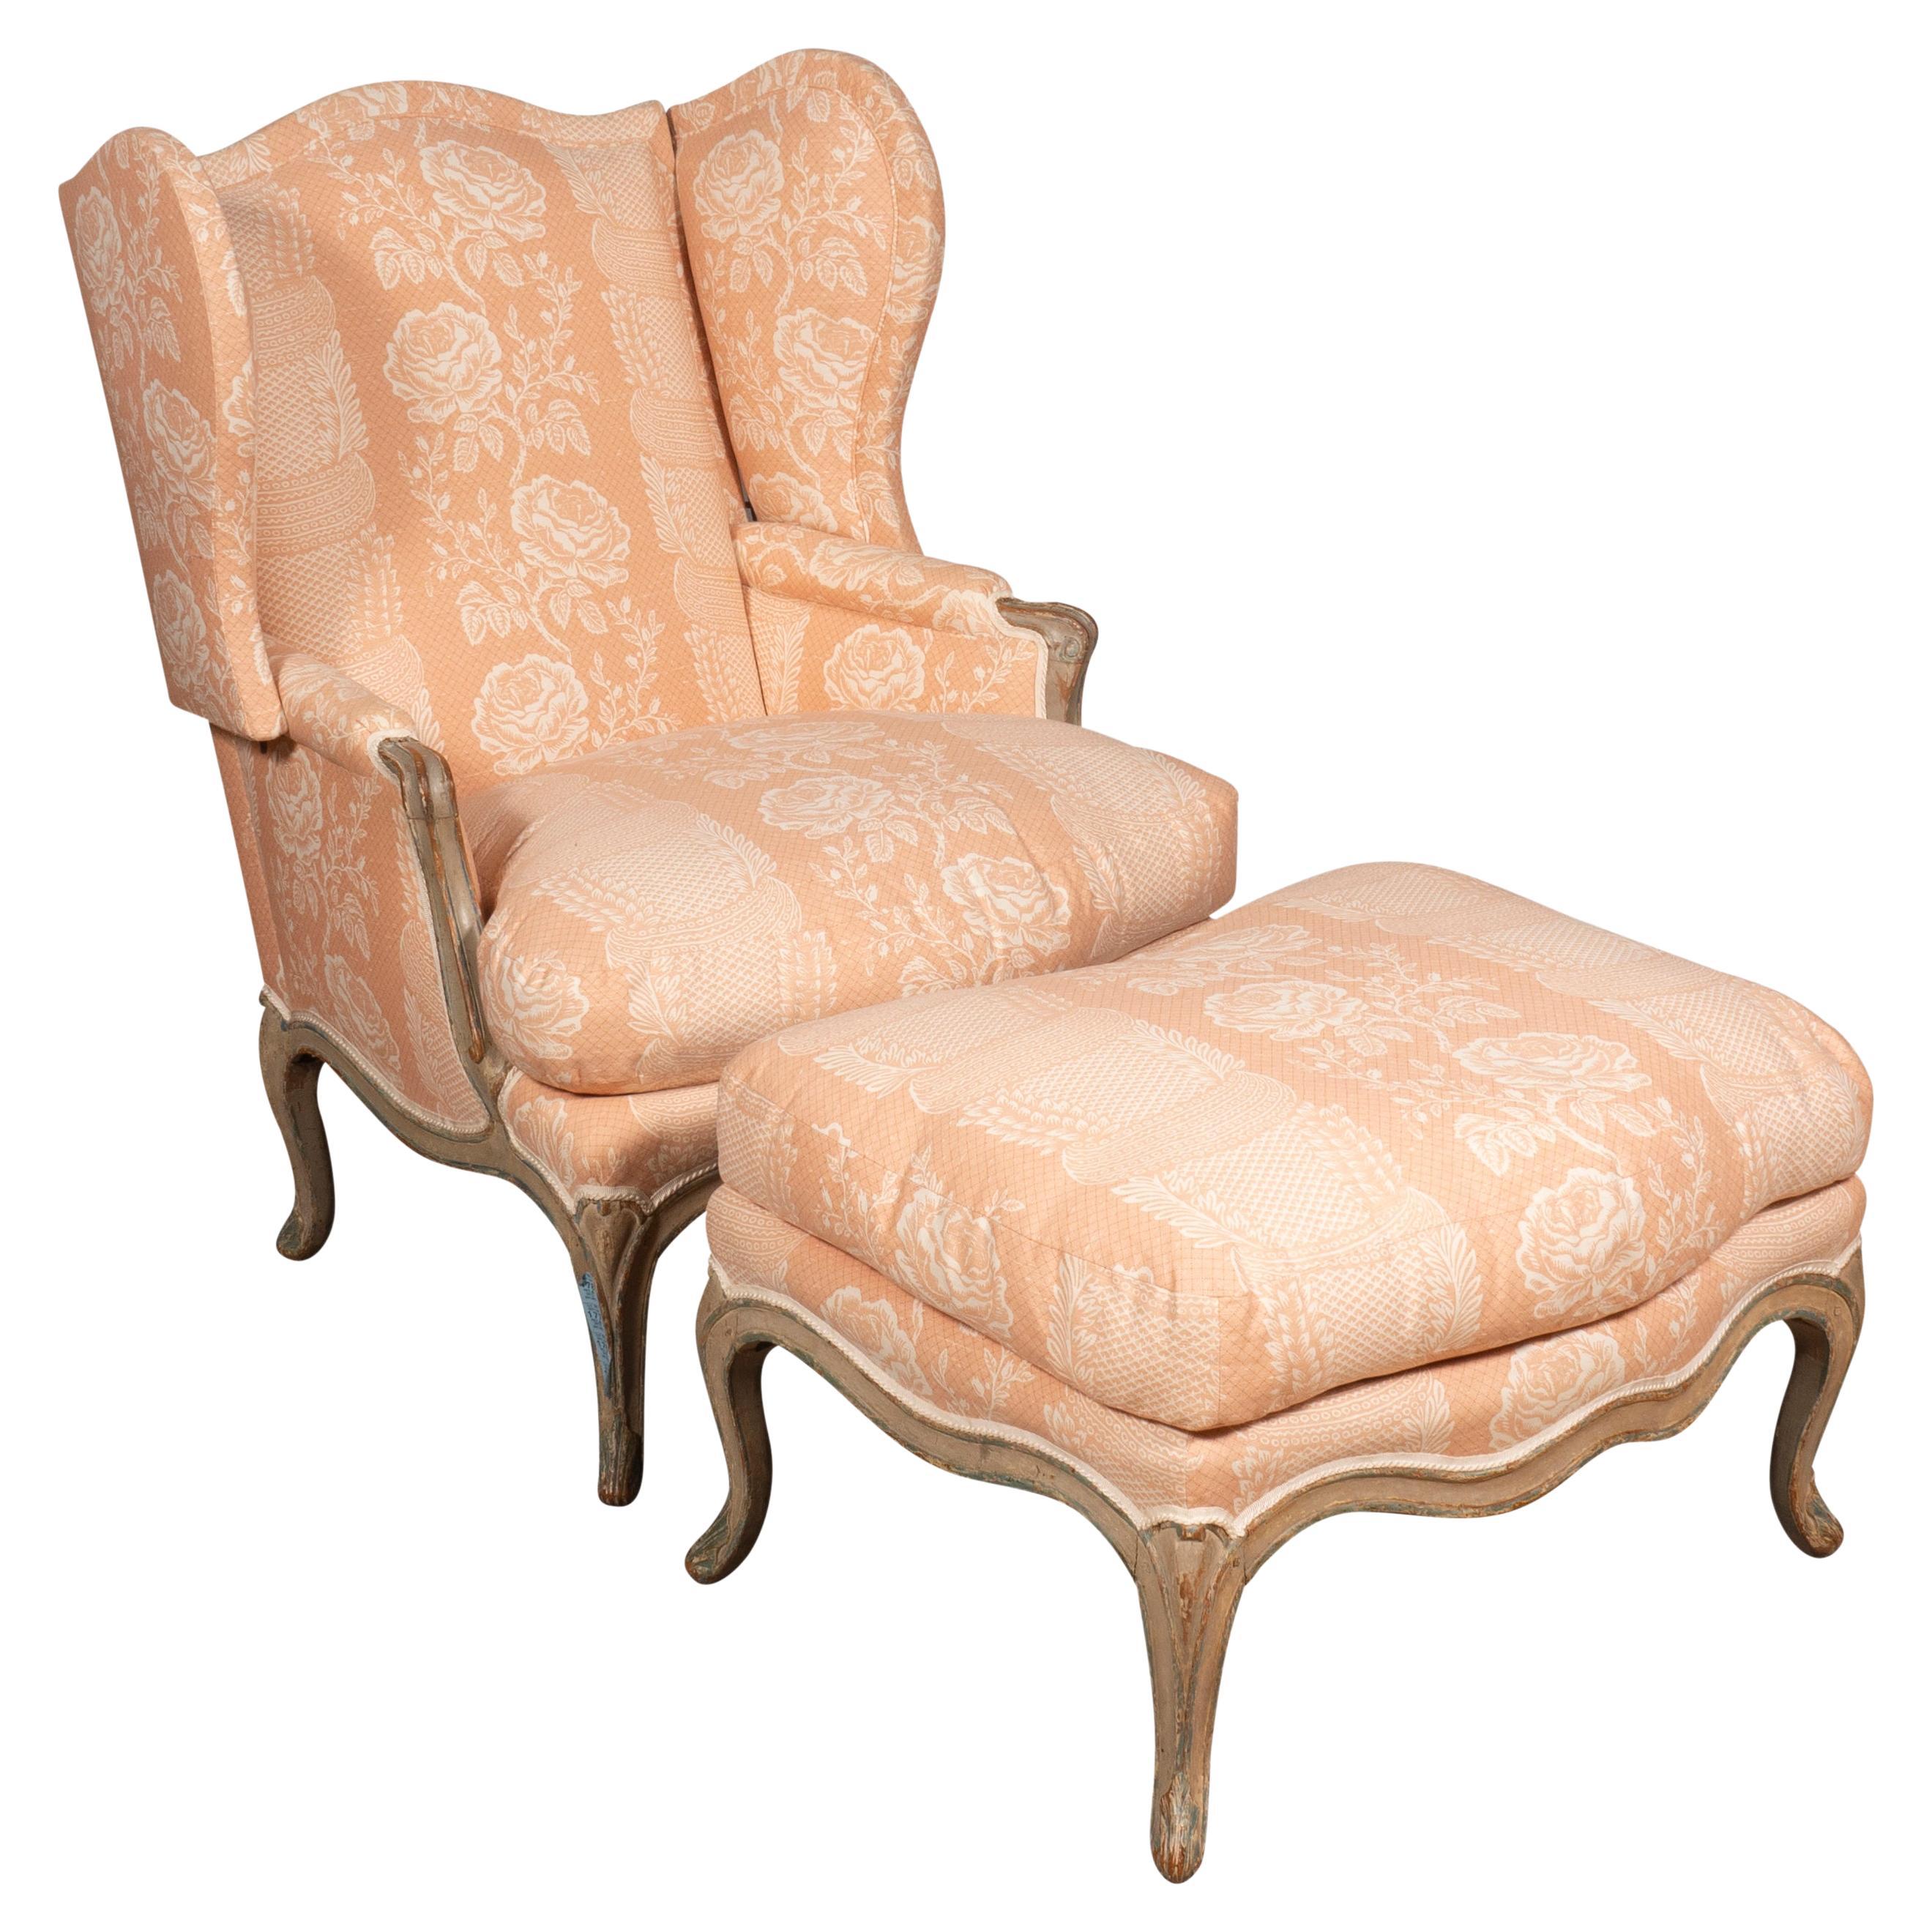 With arched back and removable wings and upholstered back with down cushion seat, molded carved arms , raised on cabriole legs with accompanying bench. Both ensuite. Formerly part of a Mark Hampton Palm Beach installation.